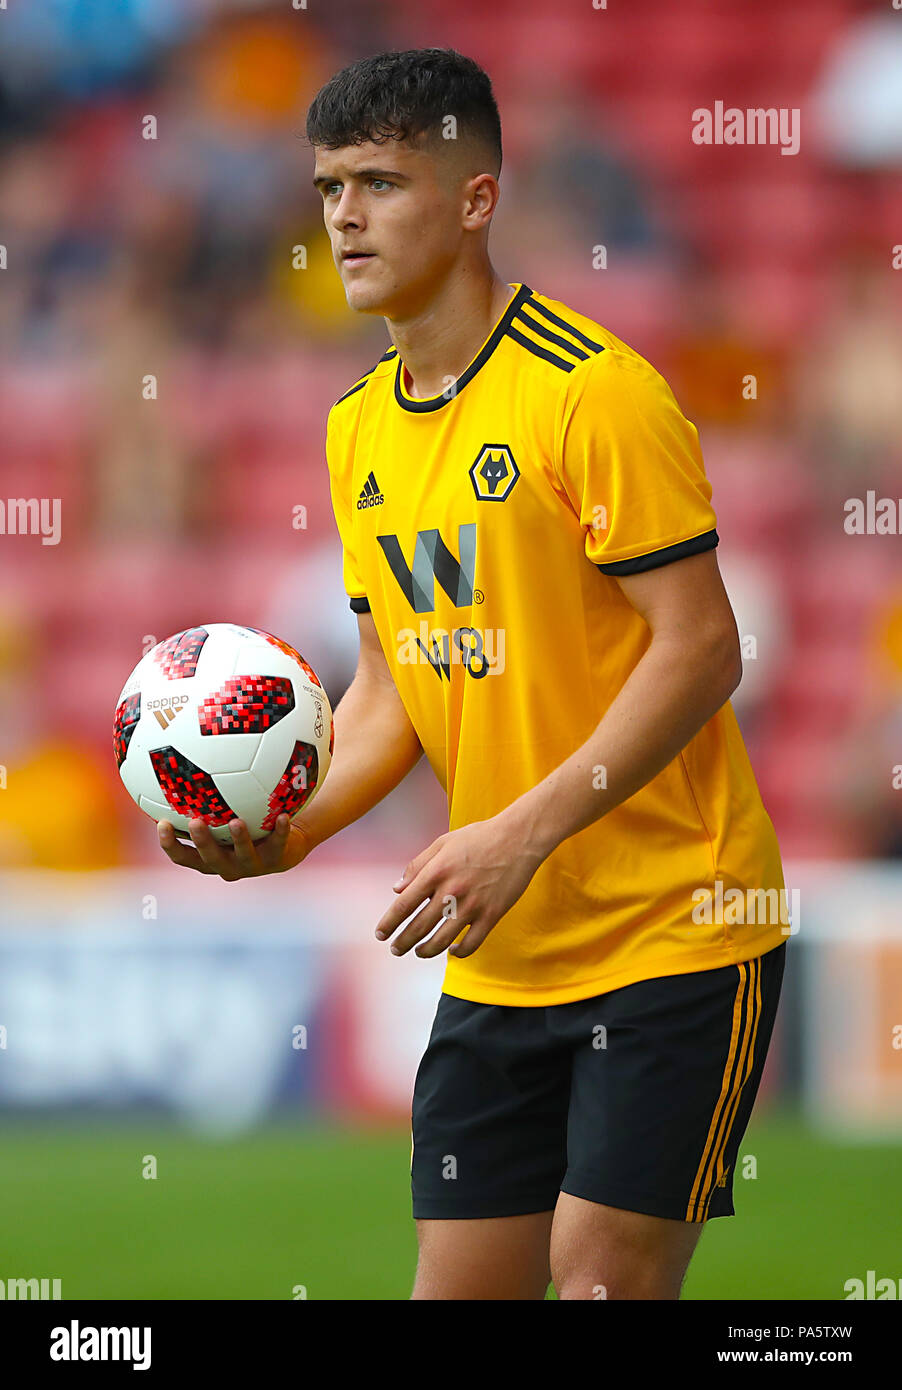 Wolverhampton Wanderers' Ryan Giles during a pre season friendly match at the Banks's Stadium, Walsall. Stock Photo